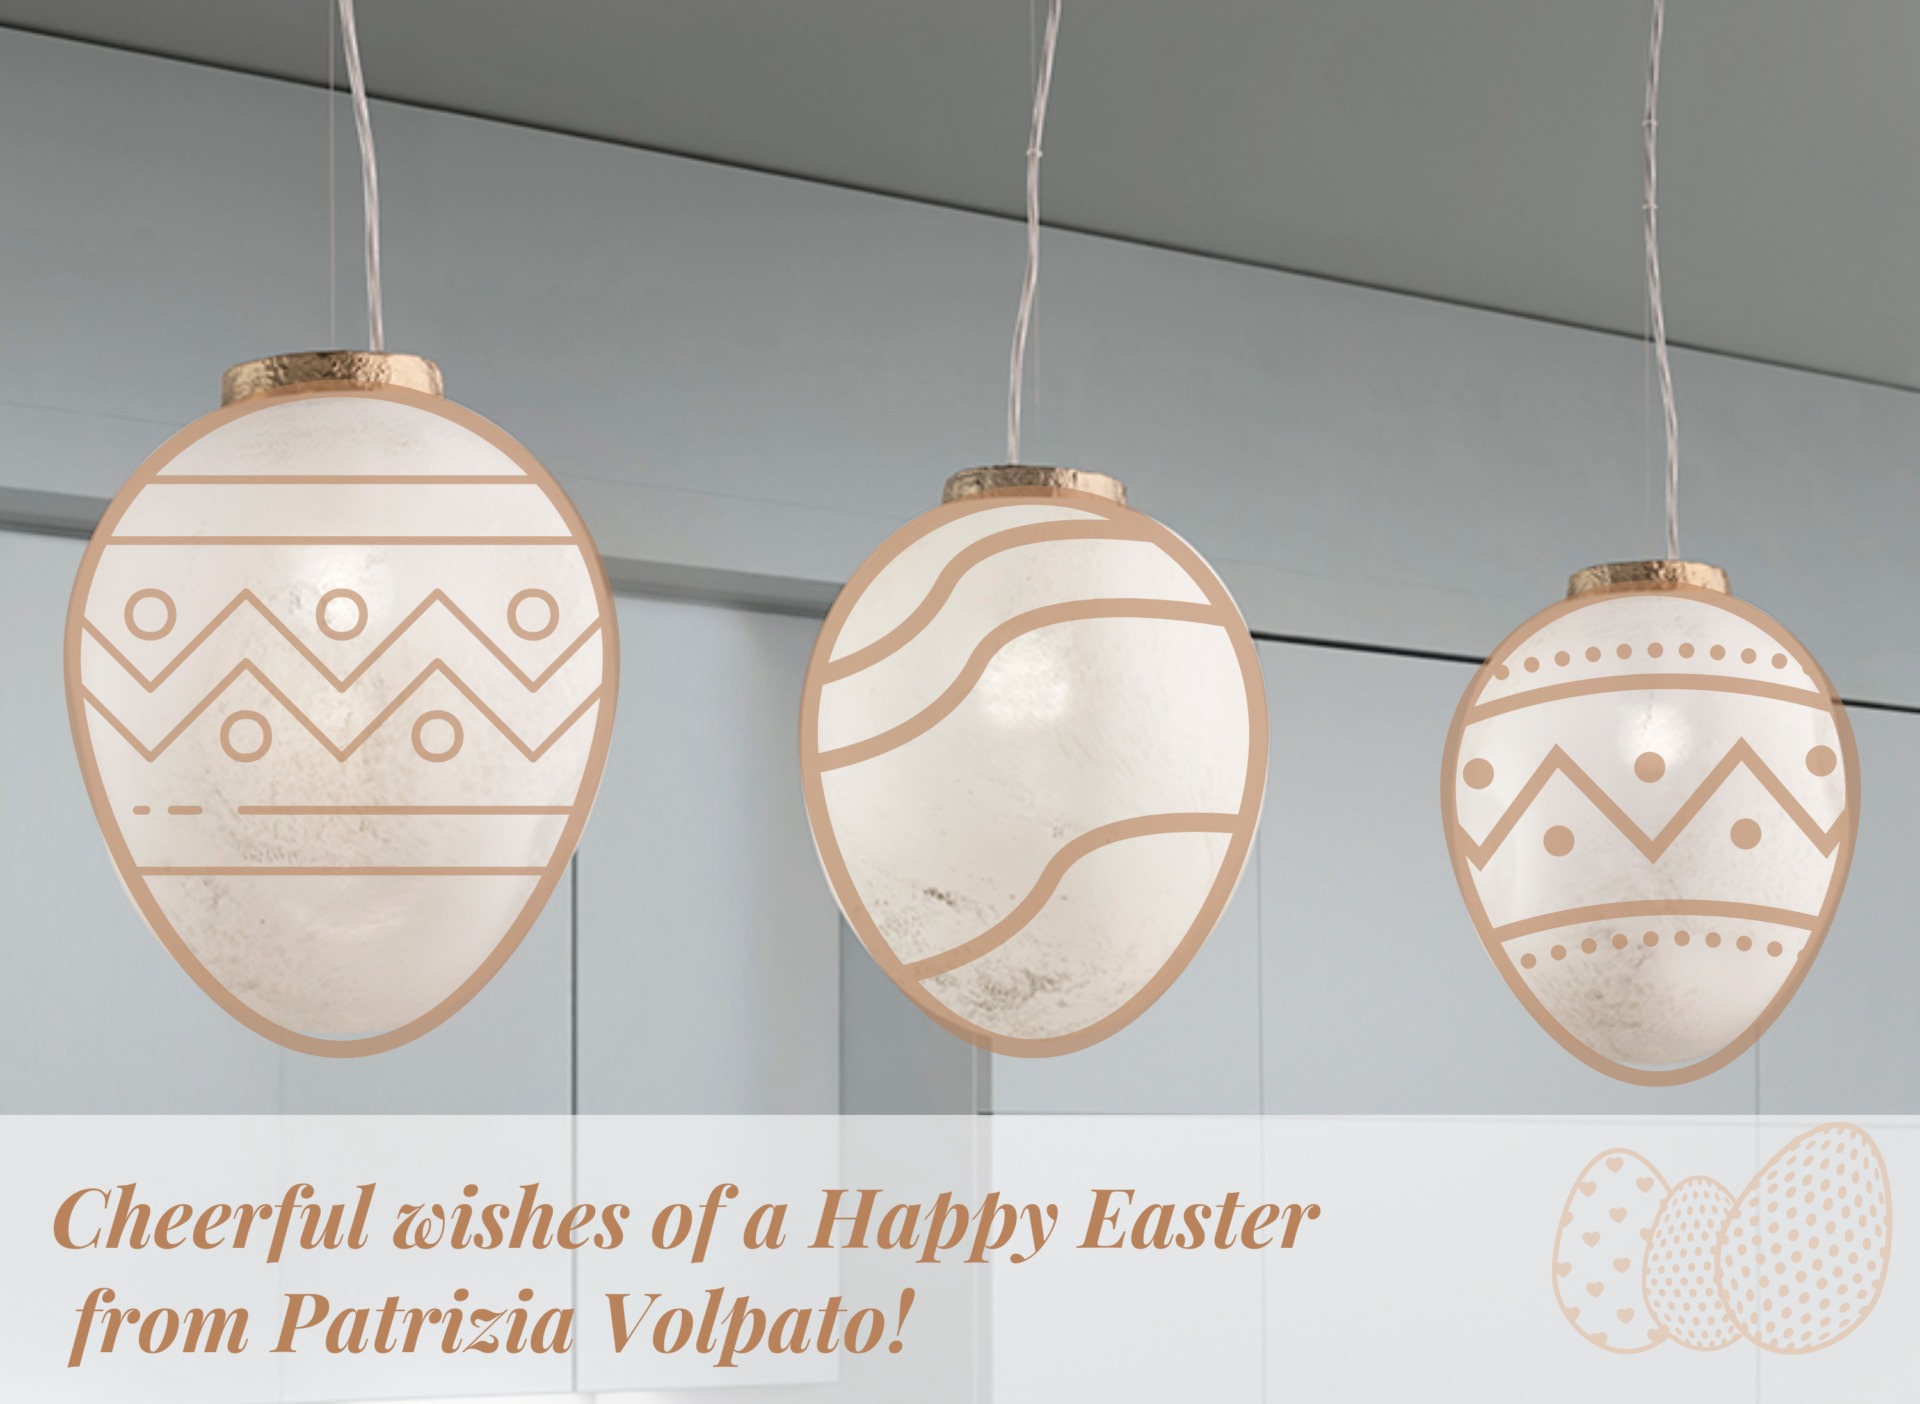 Cheerful wishes of a Happy Easter from Patrizia Volpato!